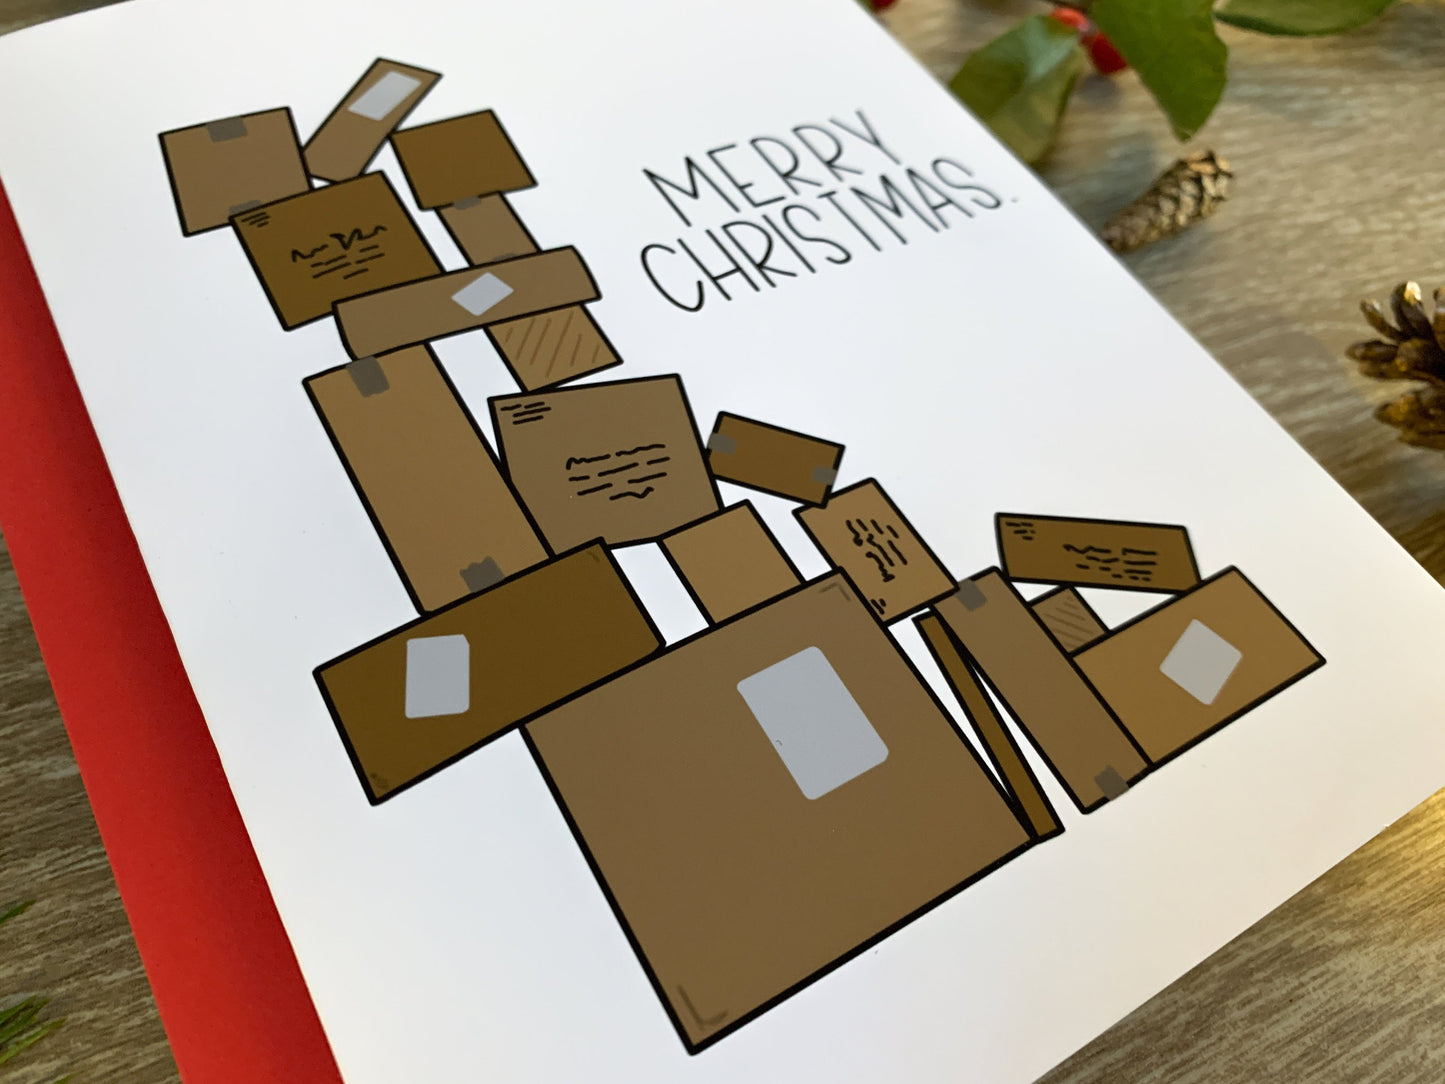 Merry Christmas Boxes Handmade Holiday Card by StoneDonut Design